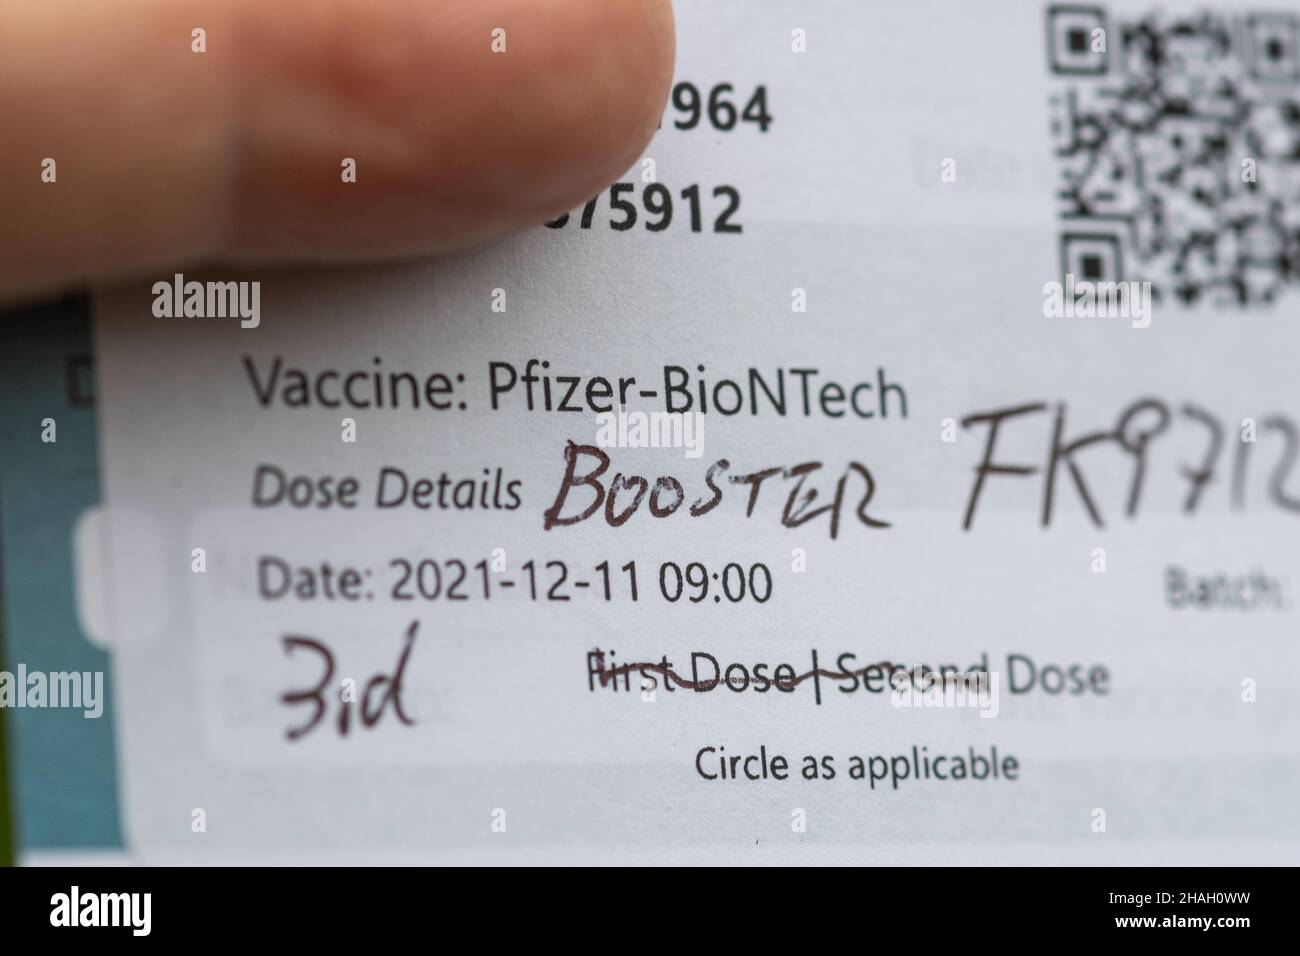 December 2021. A major effort is underway to get Covid booster jabs into arms as quickly as possible with the new Omicron variant of Covid-19 virus spreading rapidly in the United Kingdom population. Pictured is a Pfizer booster vaccination record card. Stock Photo